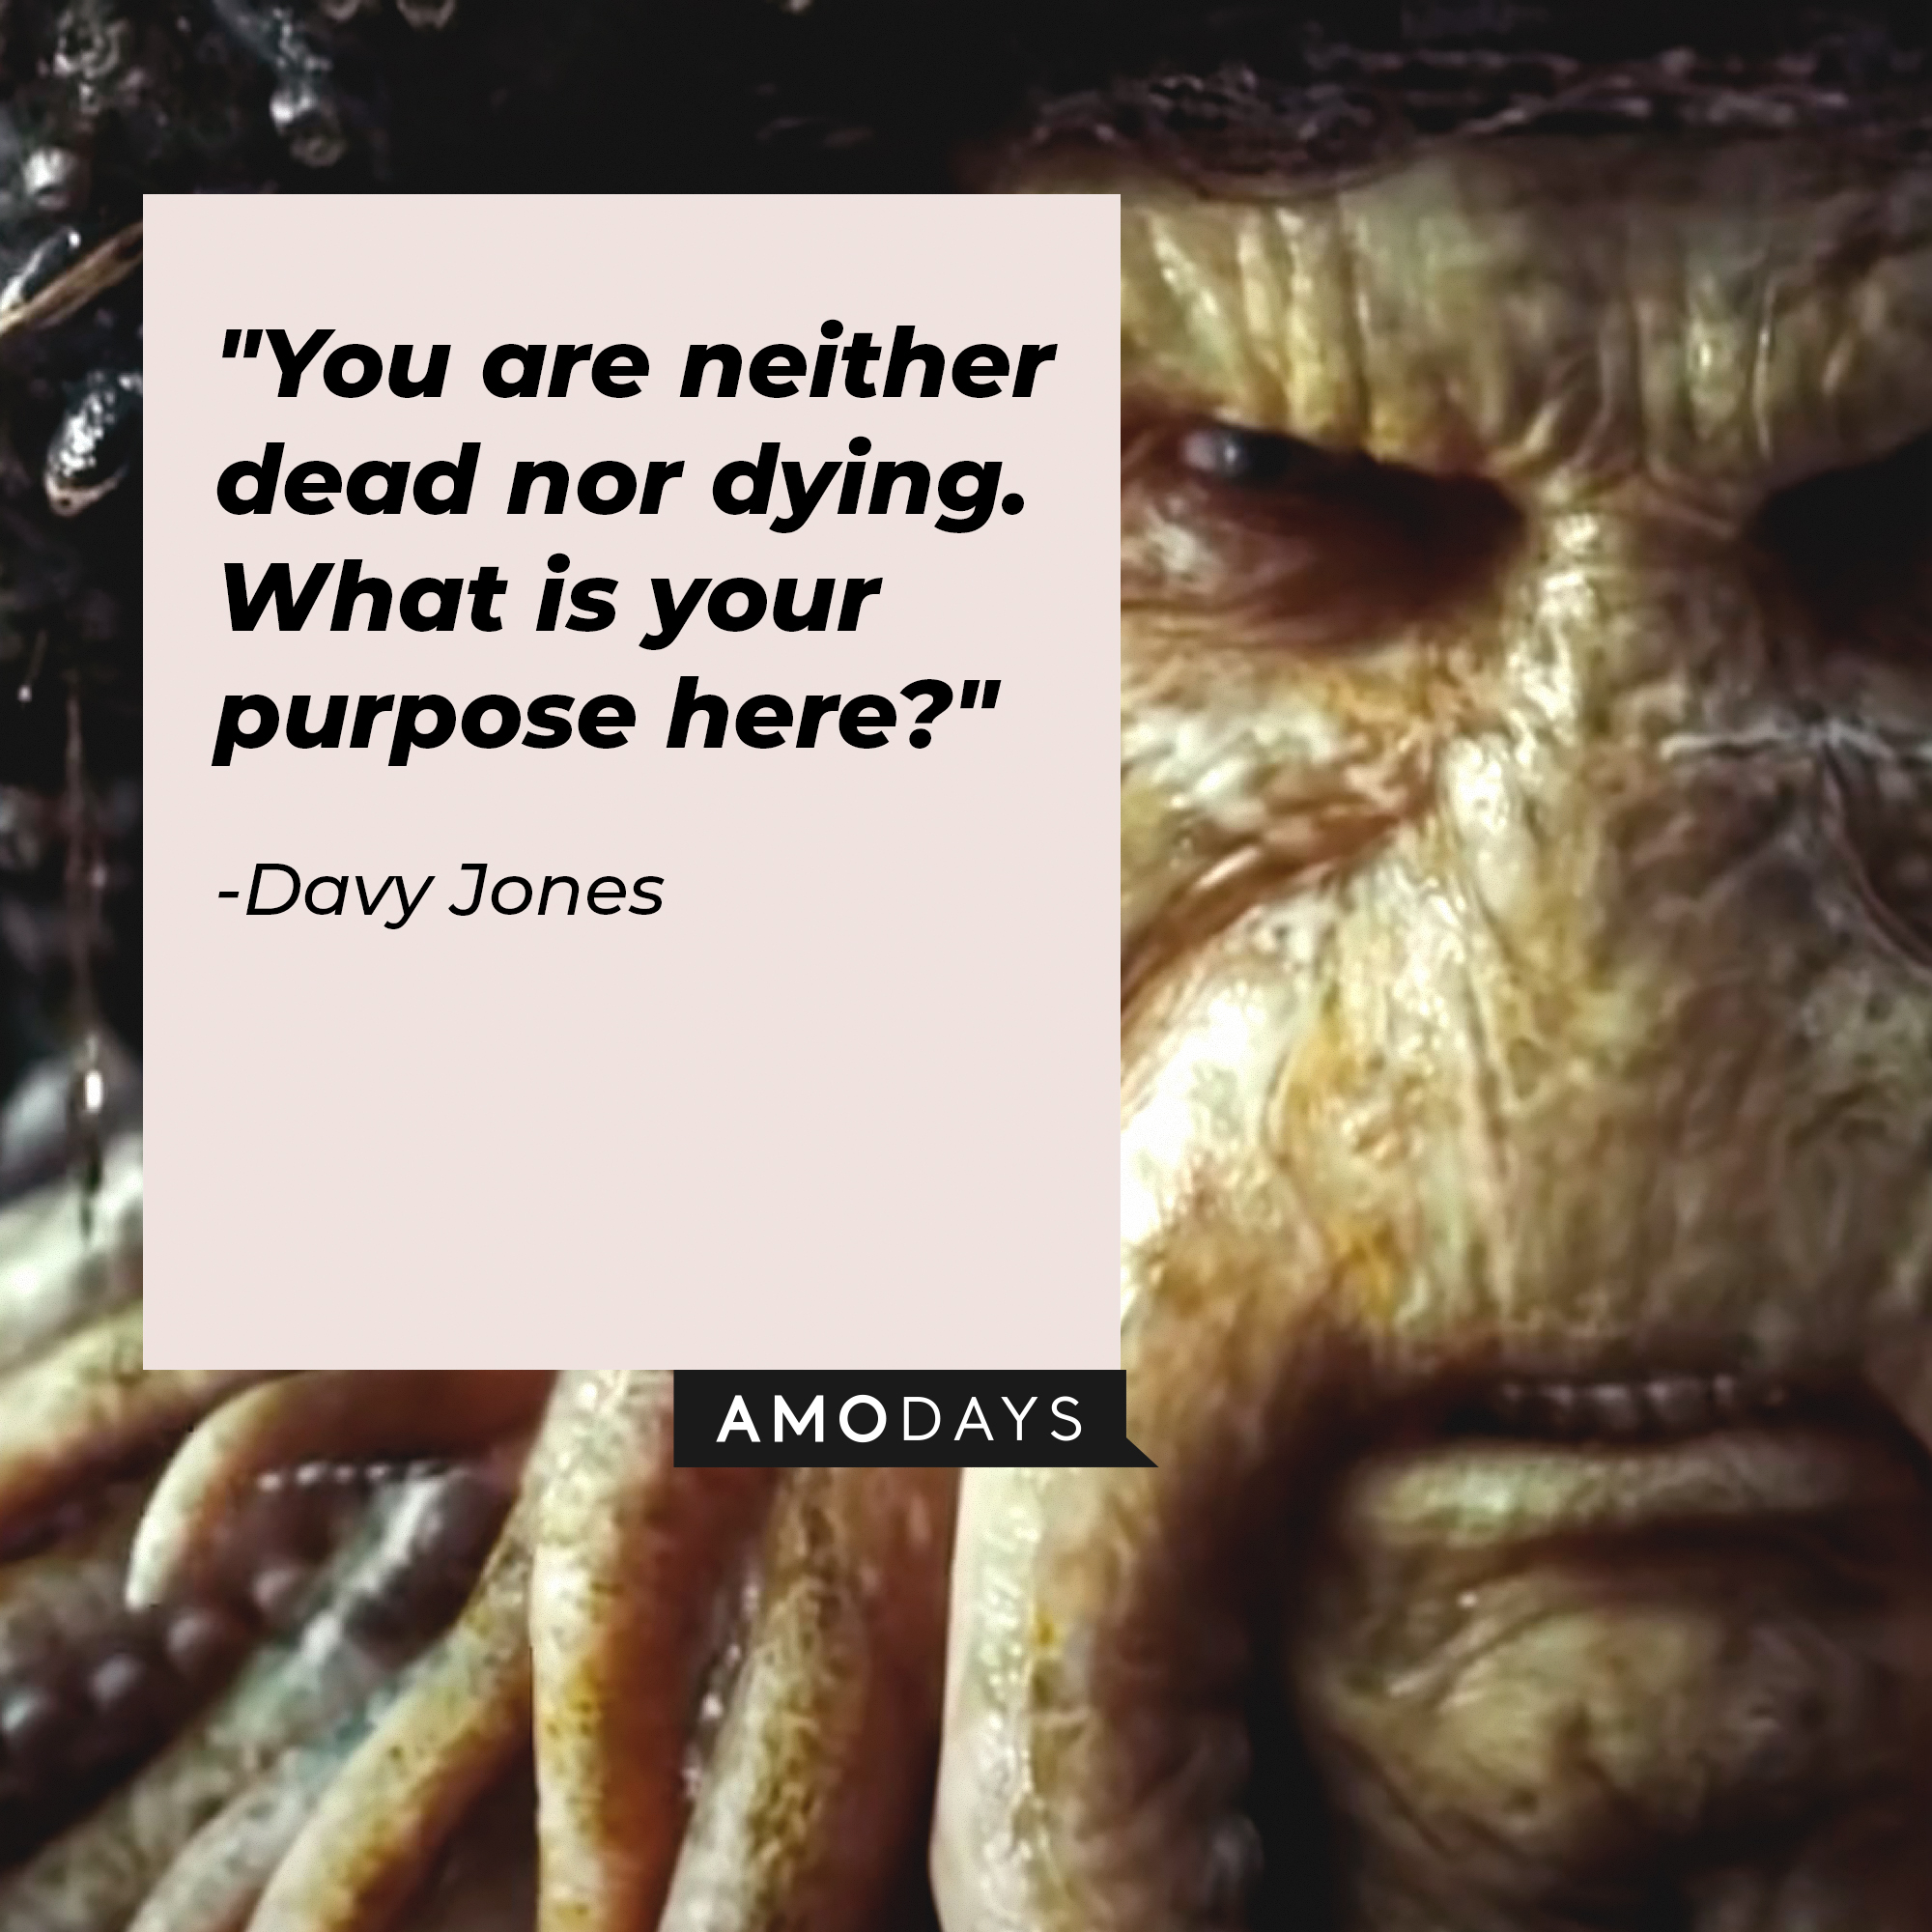 Pirates Of The Caribbean: 10 Best Davy Jones Quotes, Ranked